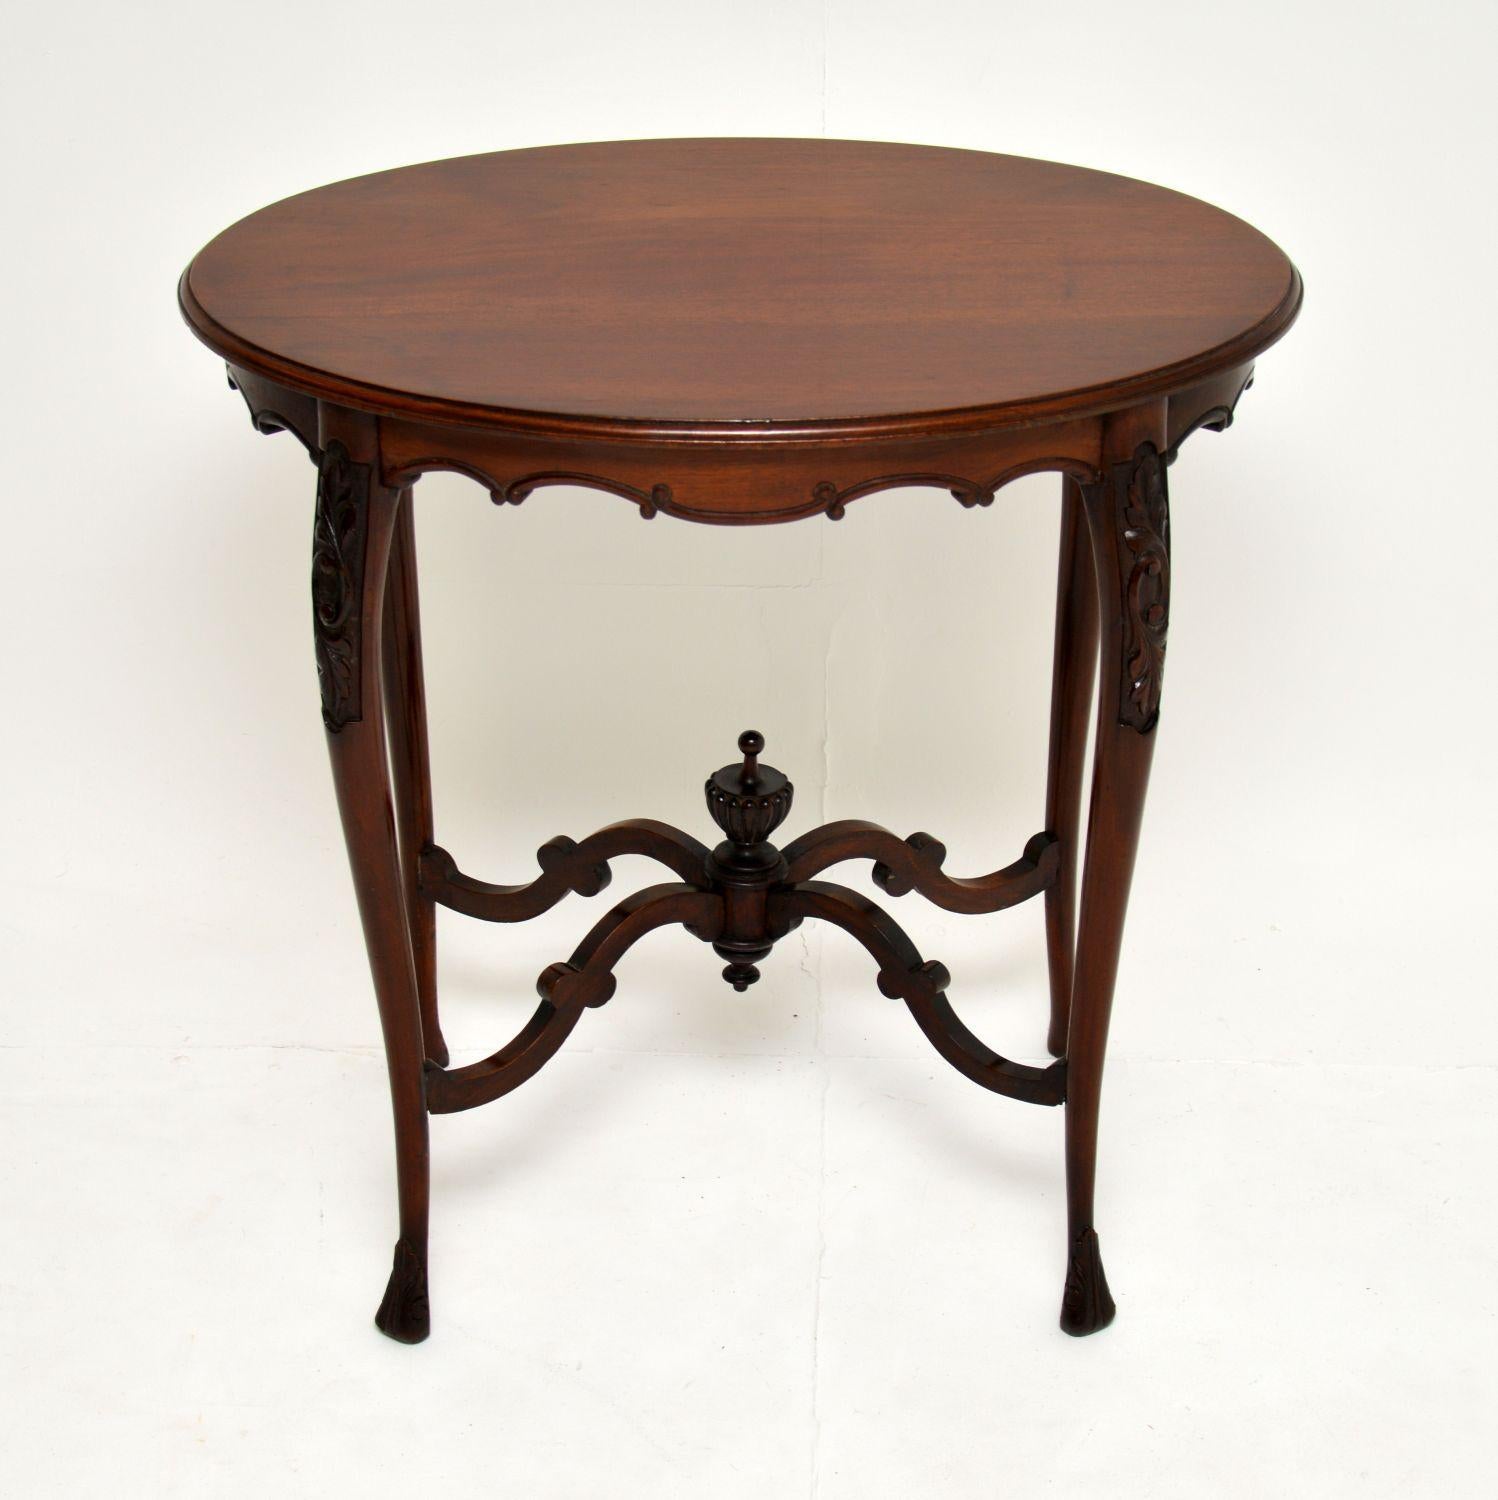 A beautiful antique Victorian occasional side table in solid mahogany. This dates from circa 1860-1980 period.

It is of amazing quality, and has a gorgeous design. There is lovely carvings on the top and the bottom of the legs, while the